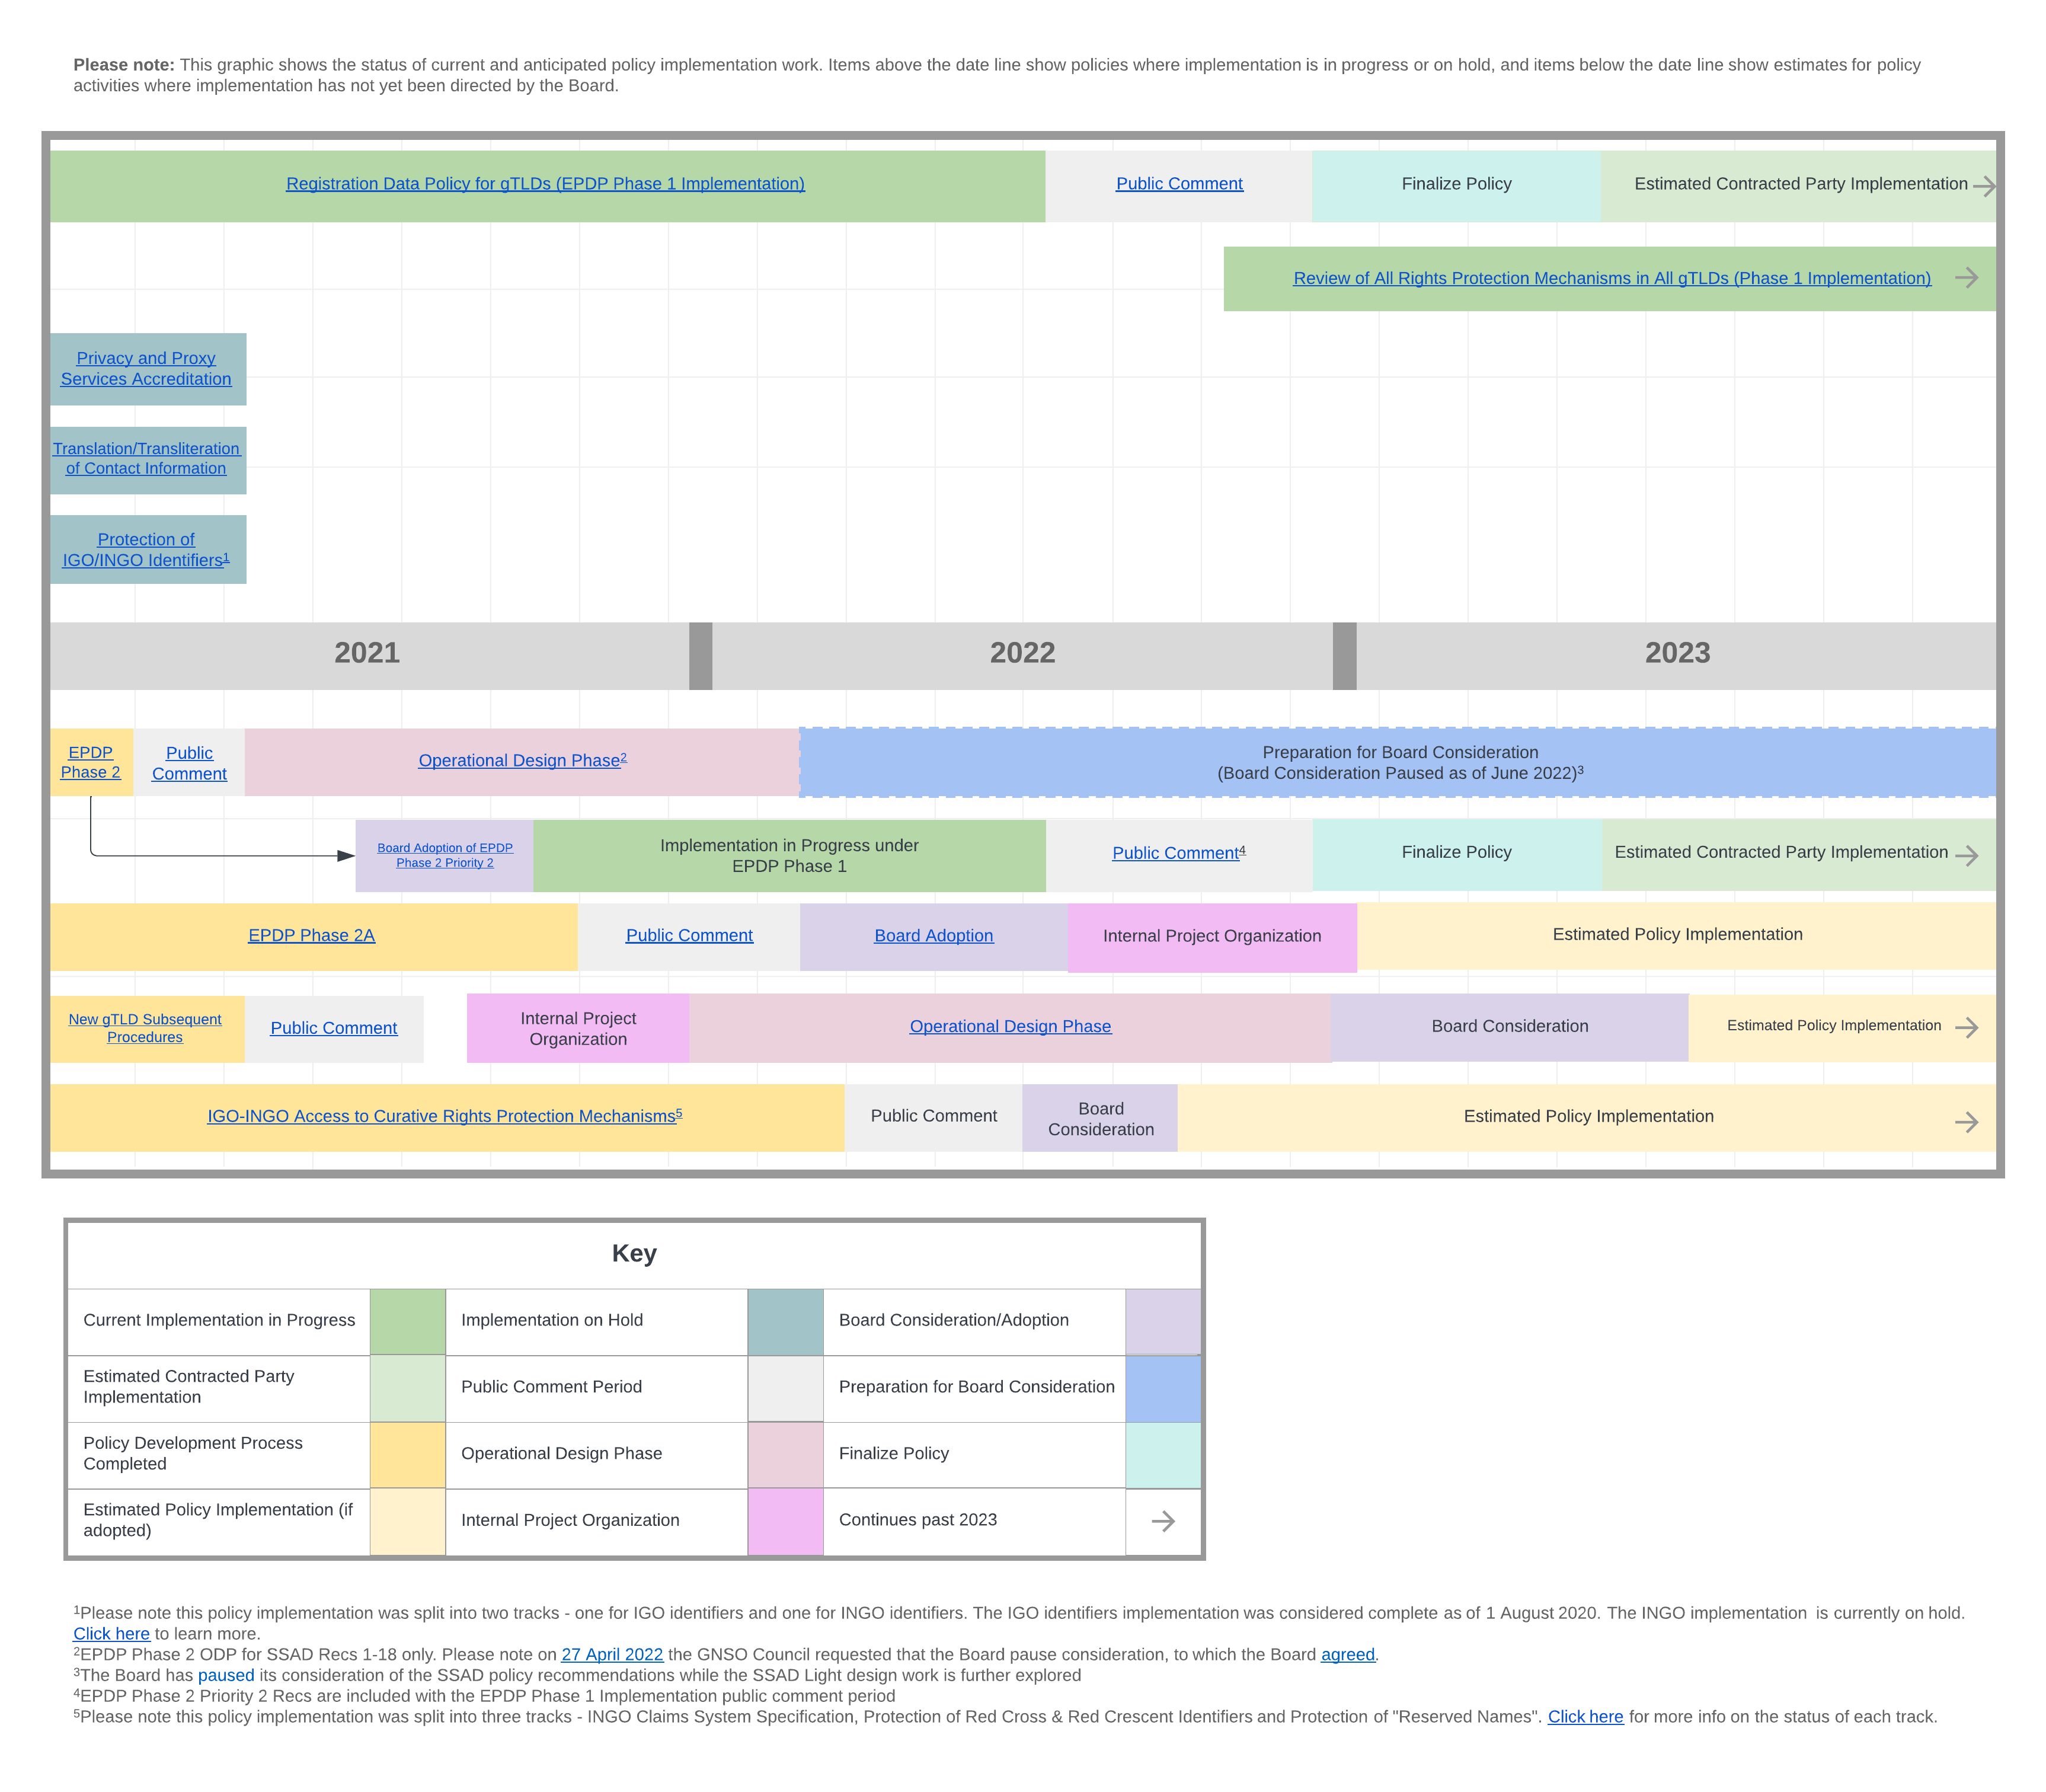 High level timeline showing ongoing Policy Development Processes and Implementation Projects from 2021-2023